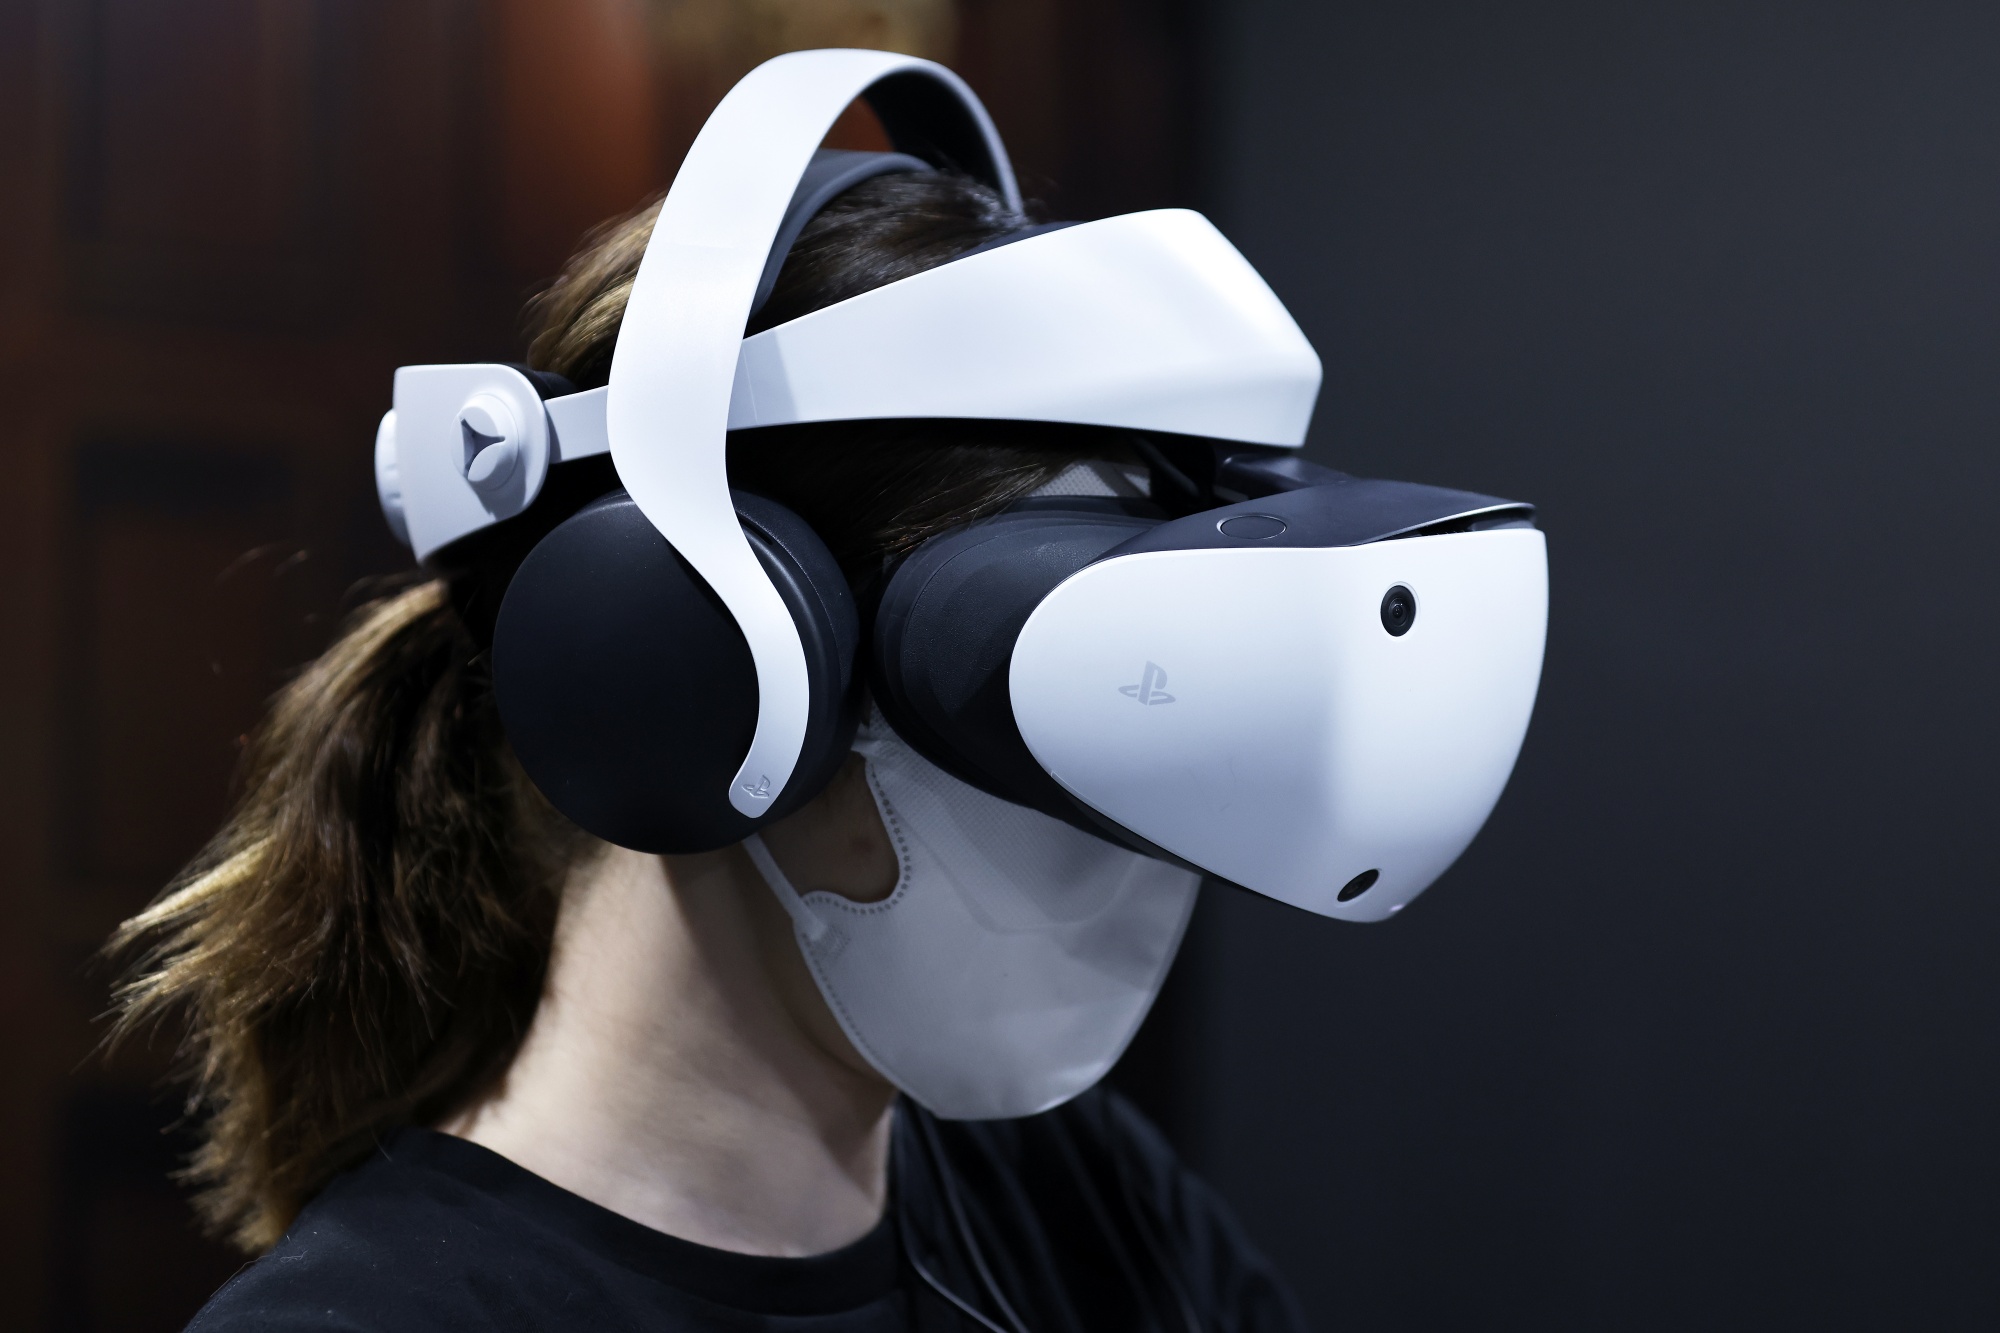 Sony PSVR2 Headset Off to Slow Start as Metaverse Push Sputters